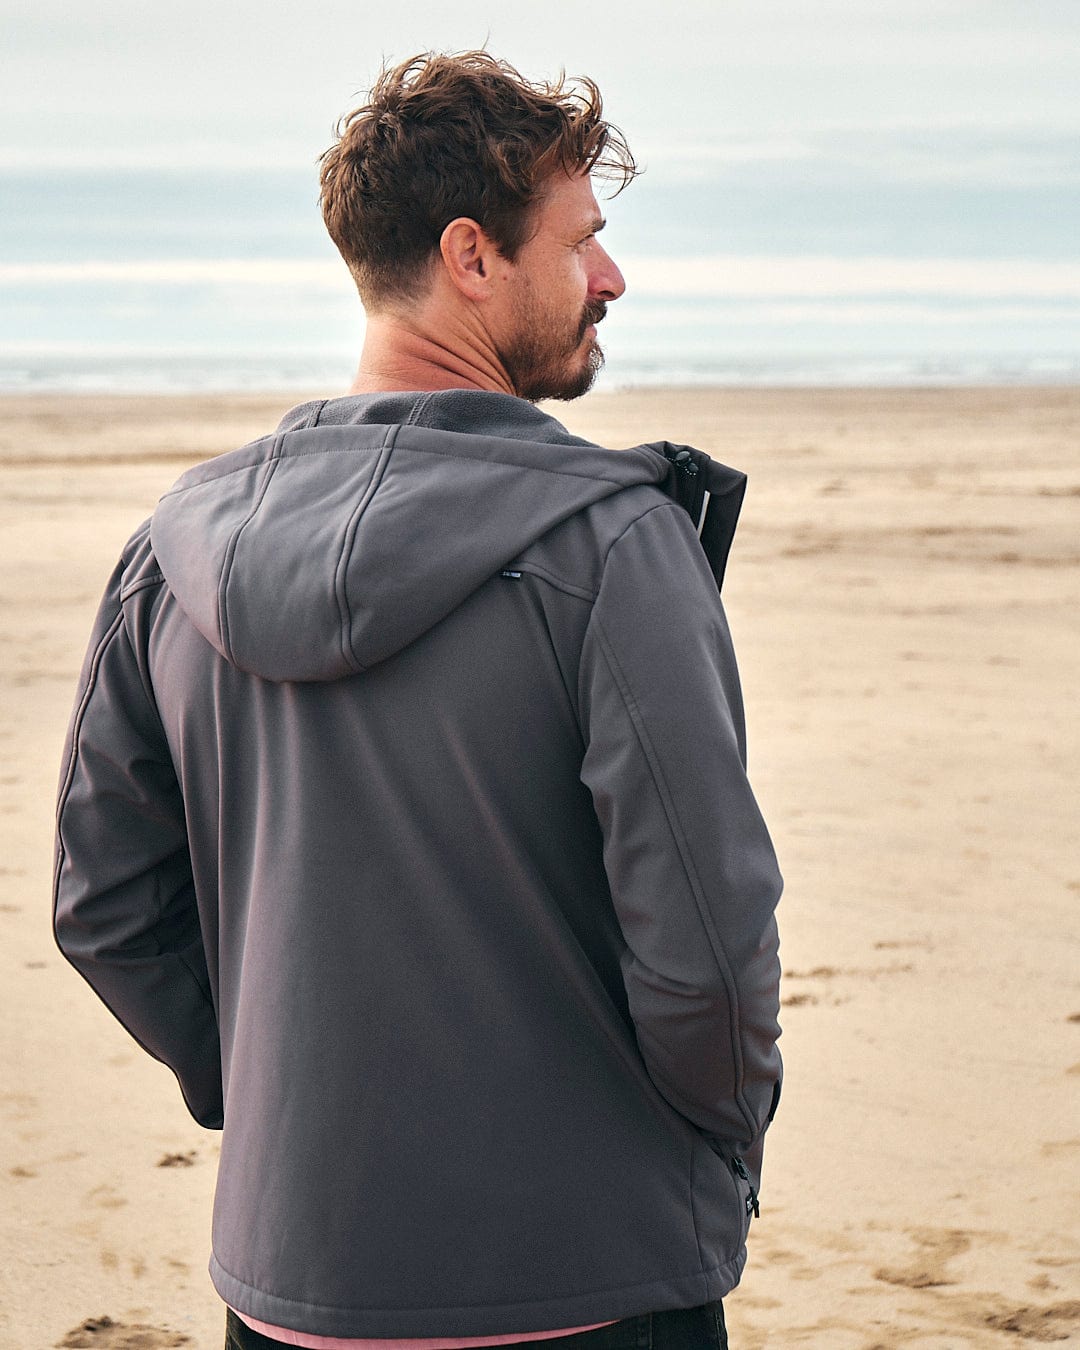 The back of a man standing on the beach wearing a Saltrock Munros - Mens Softshell Jacket - Grey, featuring water-resistant fabric and zip pockets.